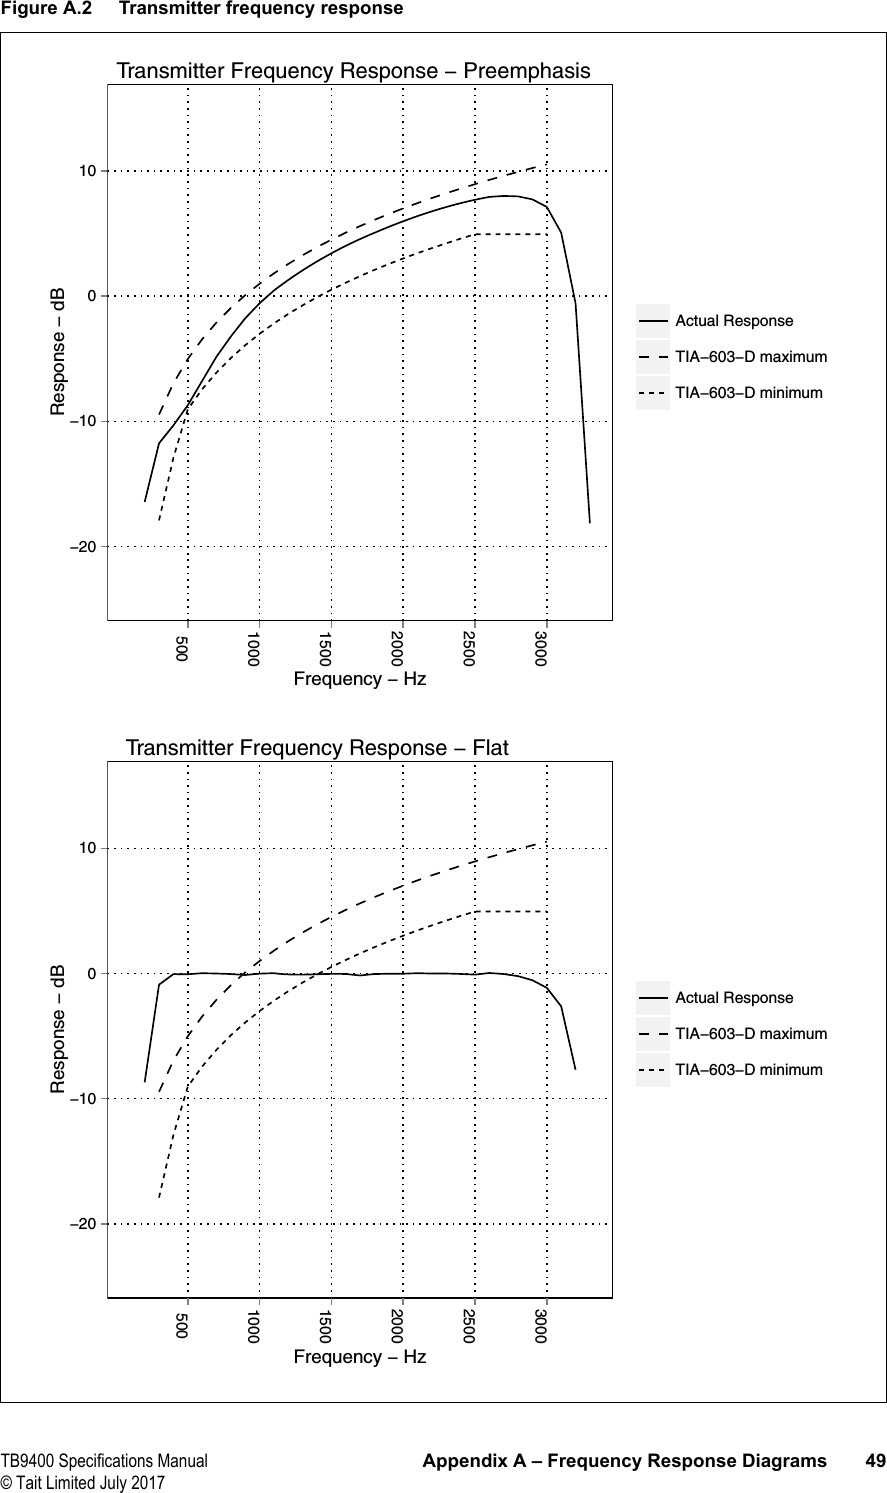  TB9400 Specifications Manual Appendix A – Frequency Response Diagrams 49© Tait Limited July 2017Figure A.2 Transmitter frequency response−20−1001050010001500200025003000Frequency − HzResponse − dBActual ResponseTIA−603−D maximumTIA−603−D minimumTransmitter Frequency Response − Flat−20−1001050010001500200025003000Frequency − HzResponse − dBActual ResponseTIA−603−D maximumTIA−603−D minimum      Transmitter Frequency Response − Preemphasis